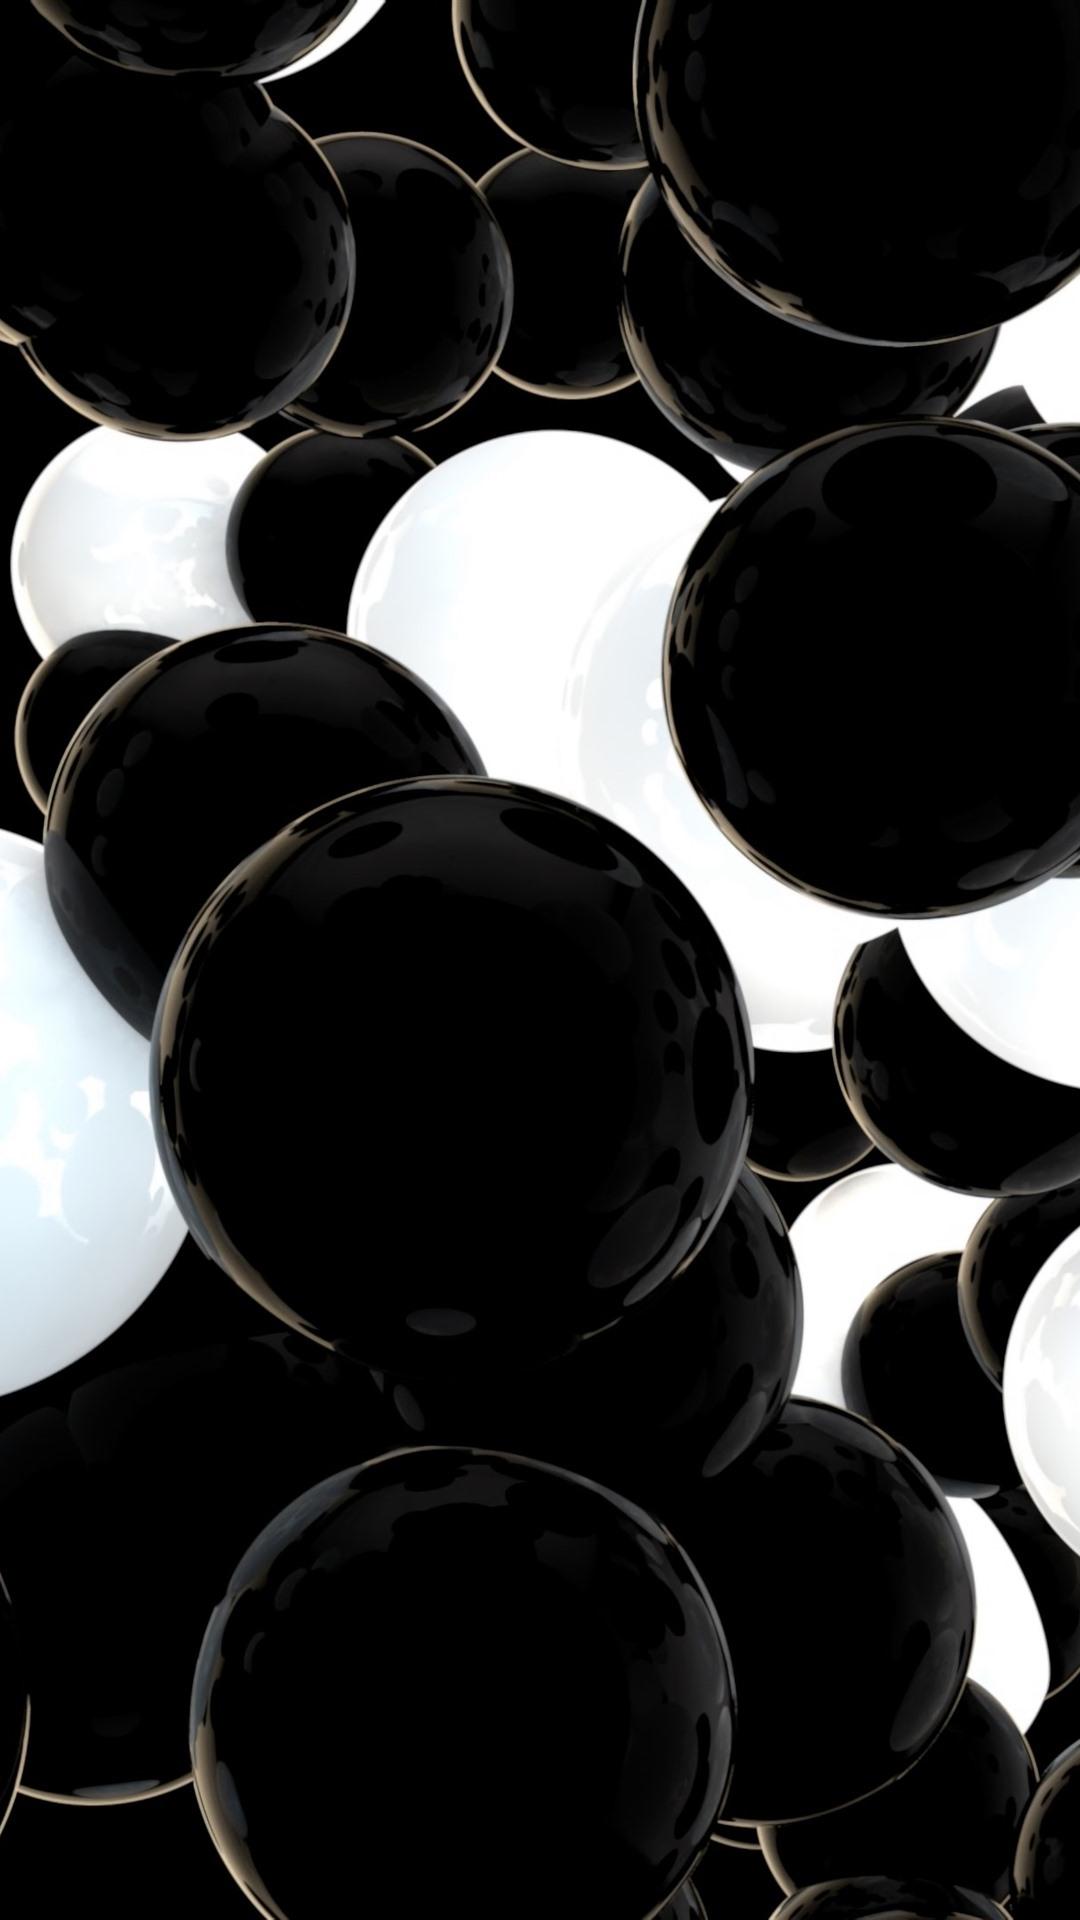 3D Black And White Balls 1080x1920 IPhone 8 7 6 6S Plus